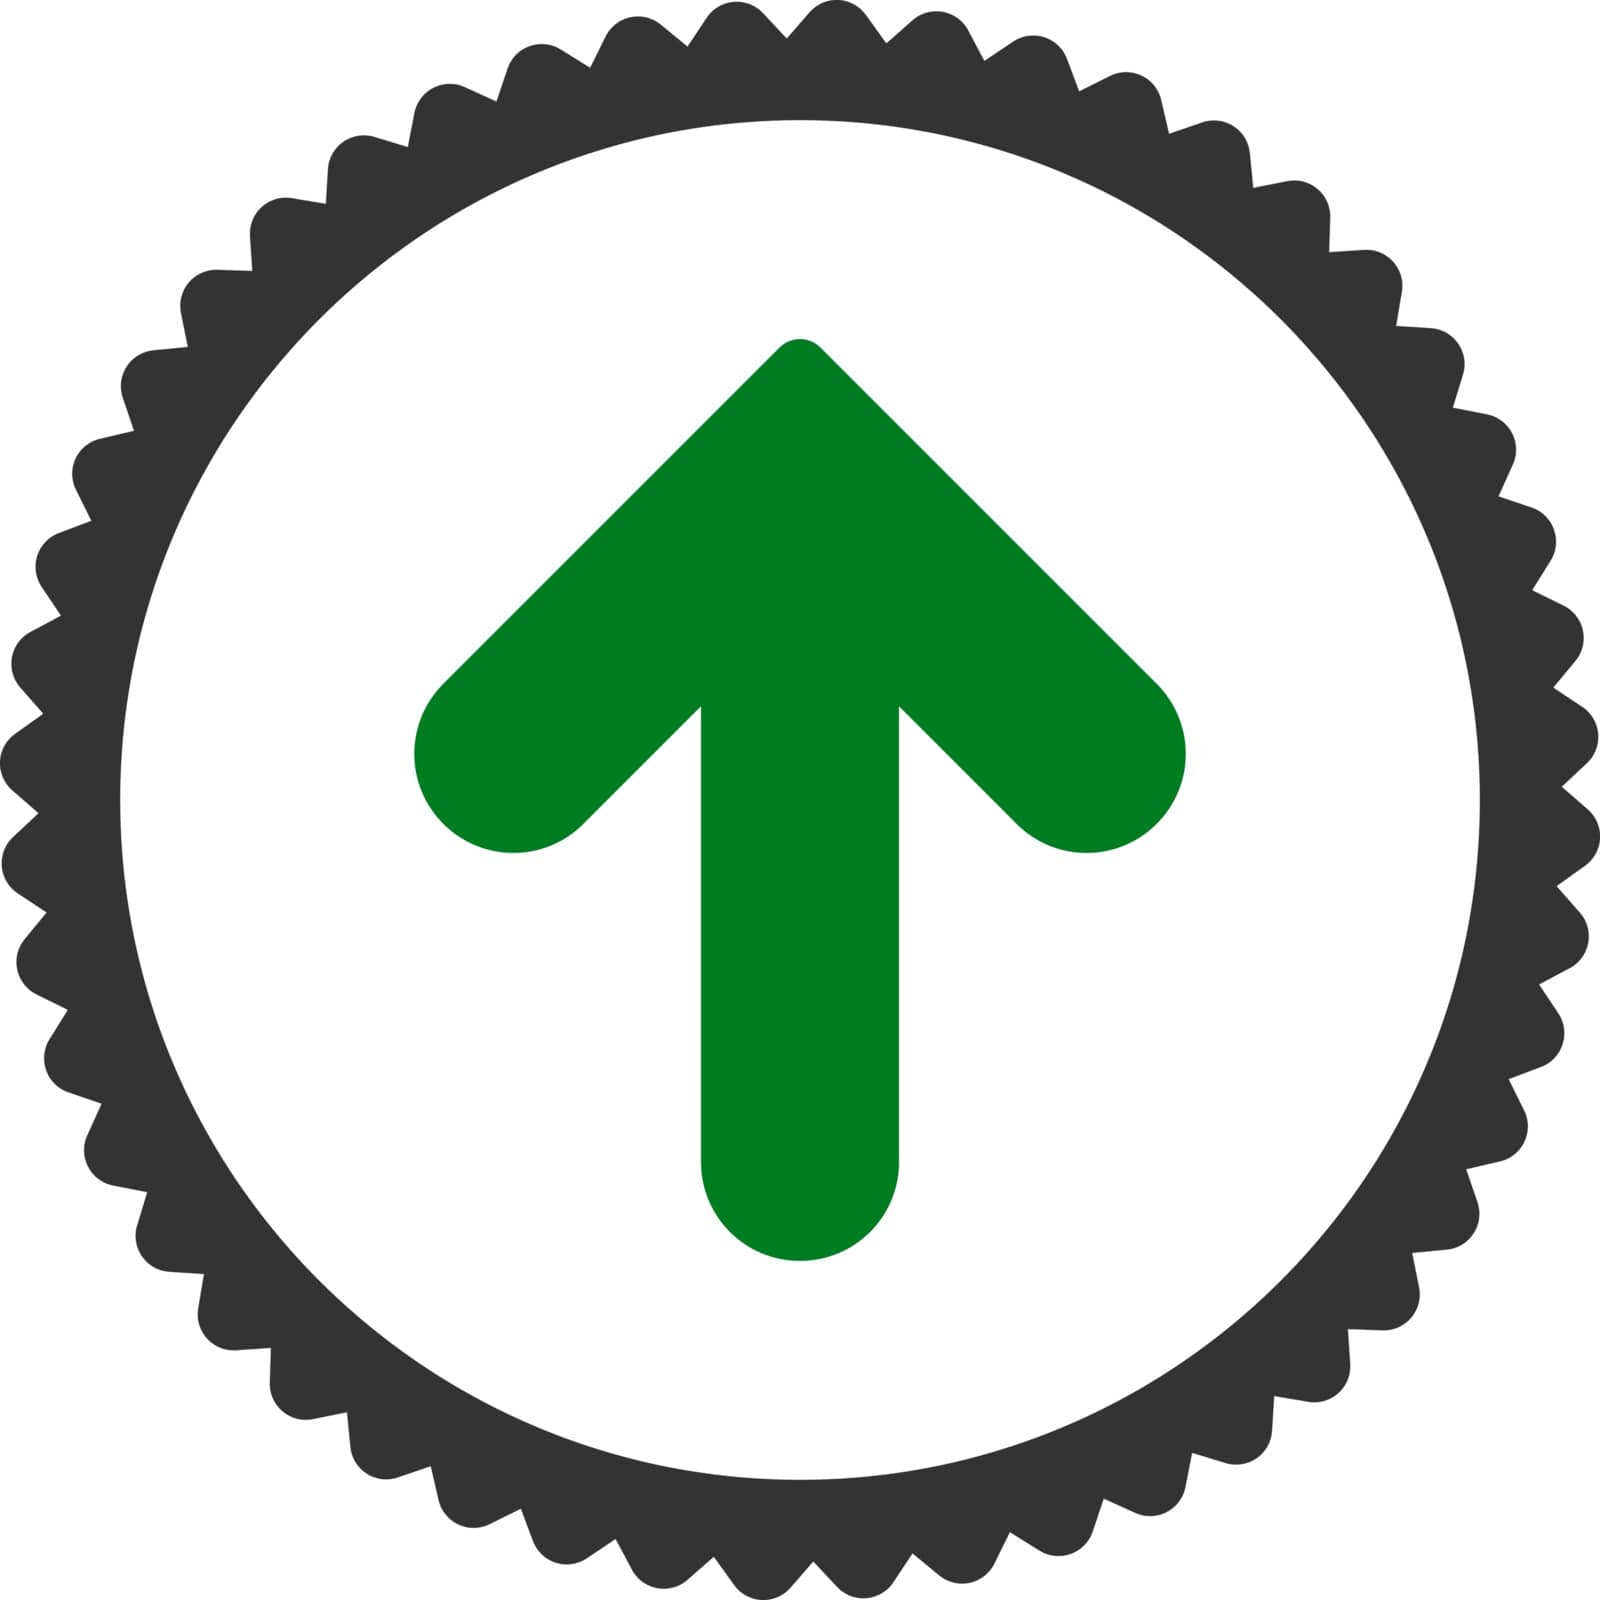 Arrow Up round stamp icon. This flat vector symbol is drawn with green and gray colors on a white background.